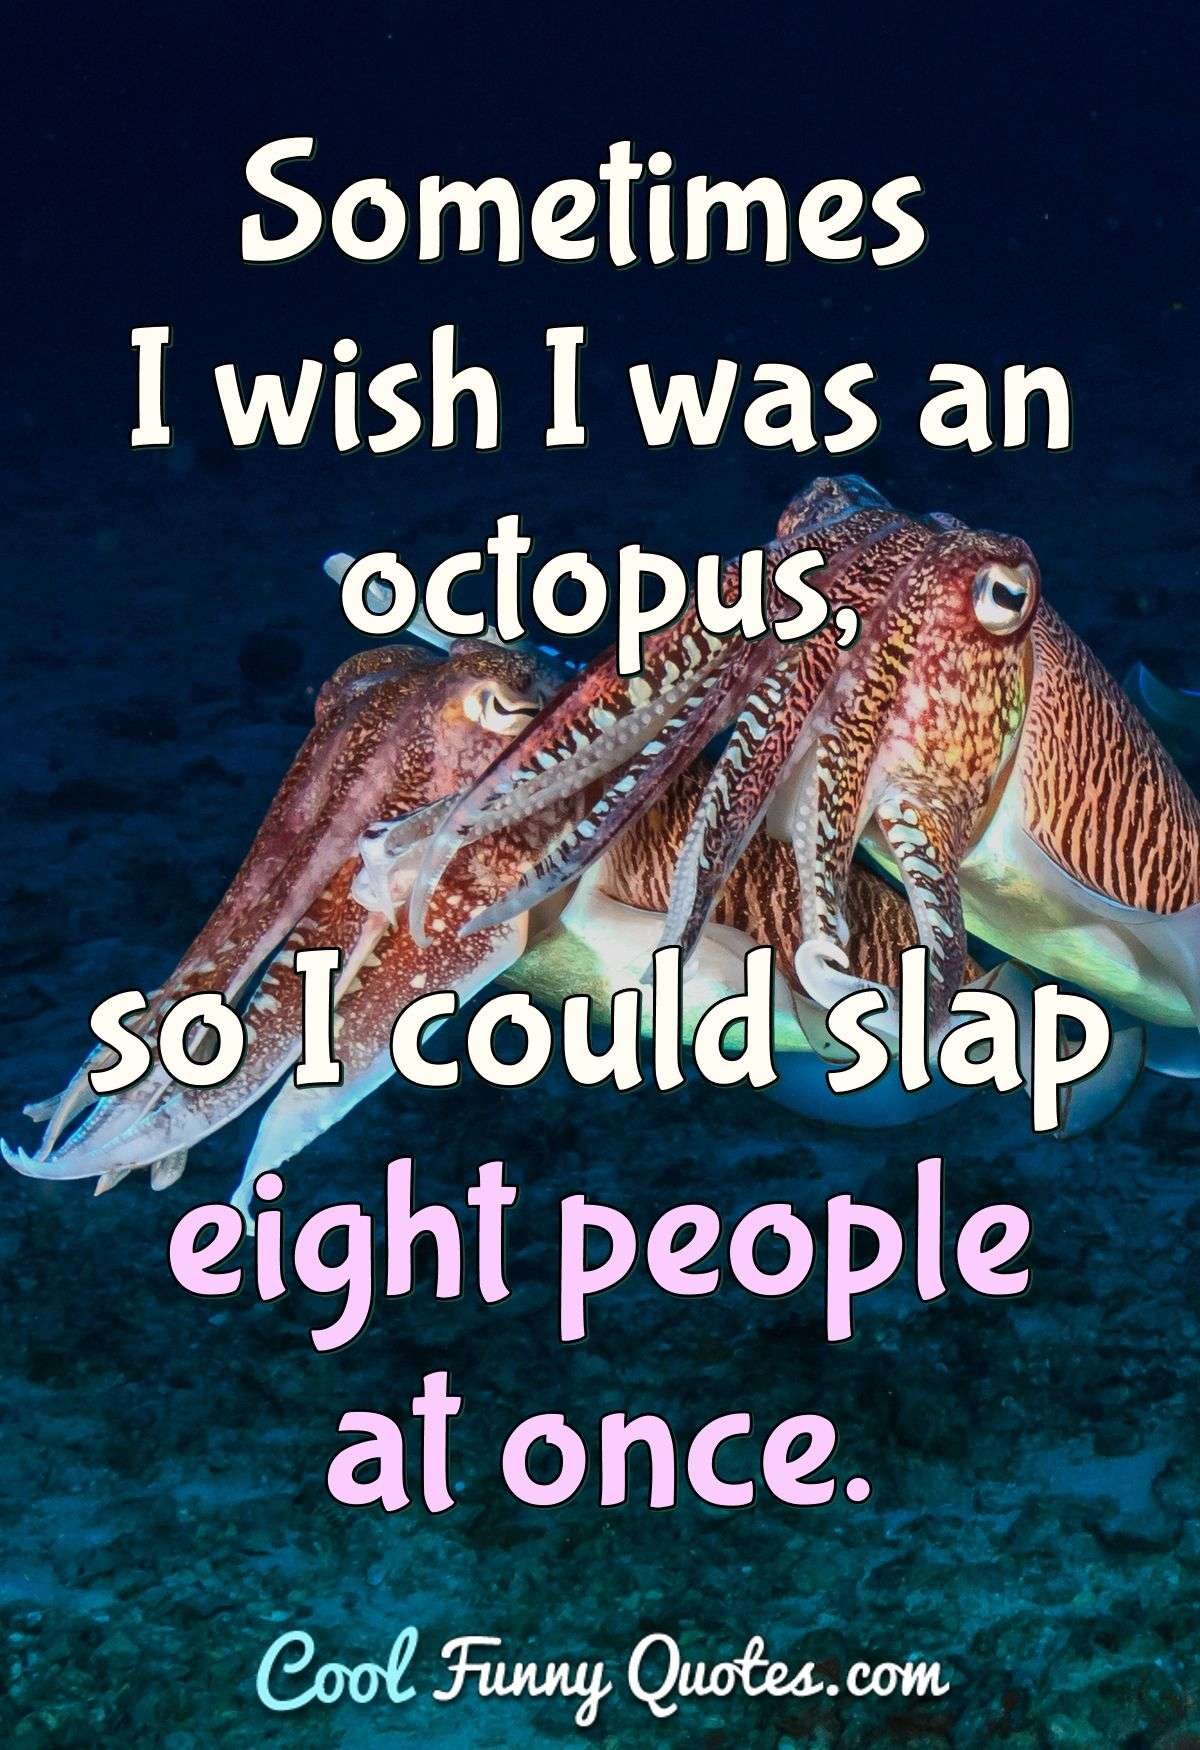 Sometimes I wish I was an octopus, so I could slap eight people at once. - Anonymous